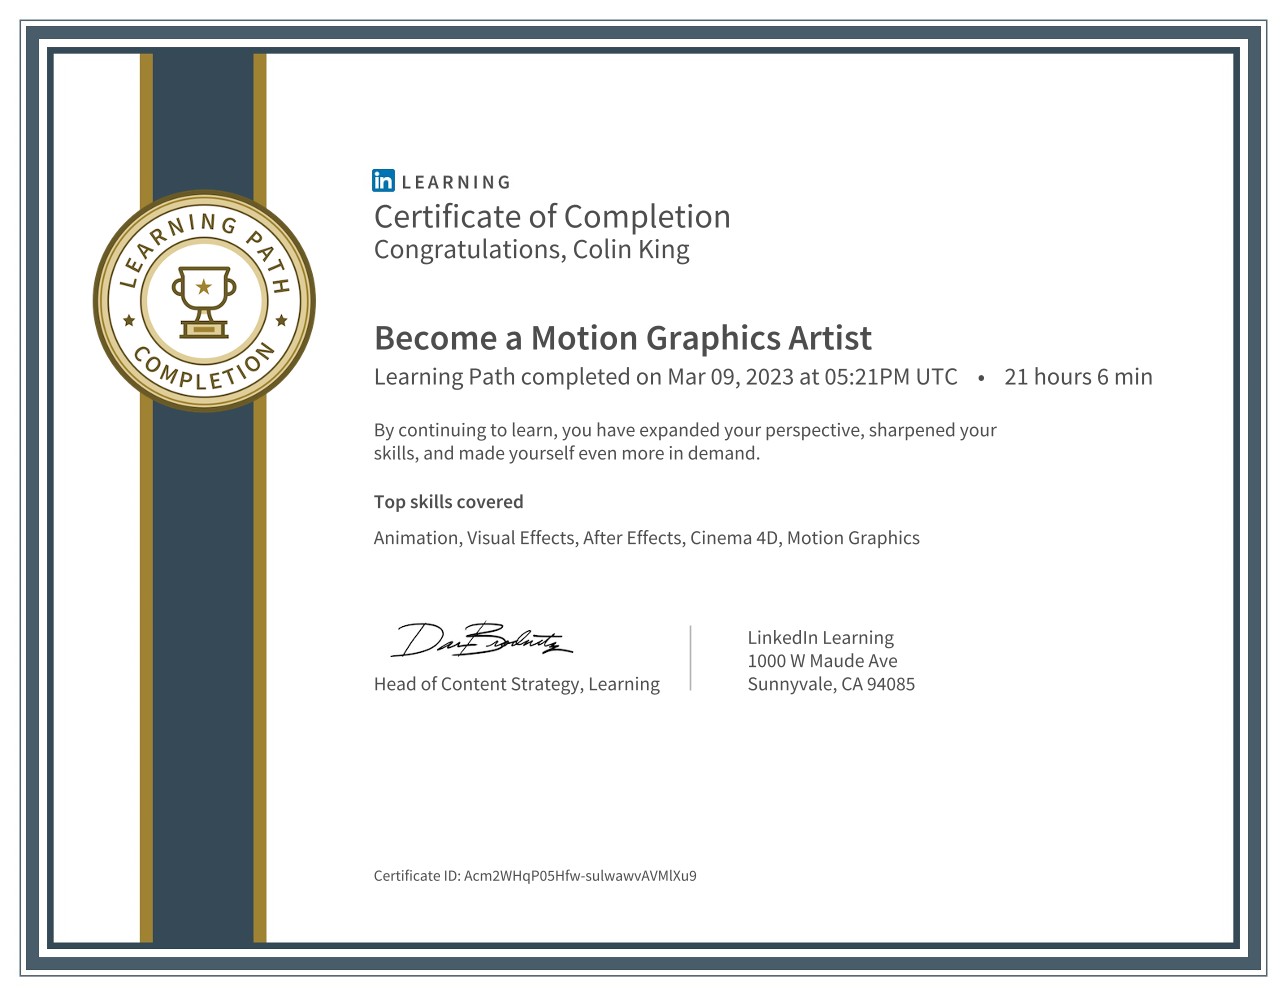 Explore Motion Graphics and Visual Effects certificate